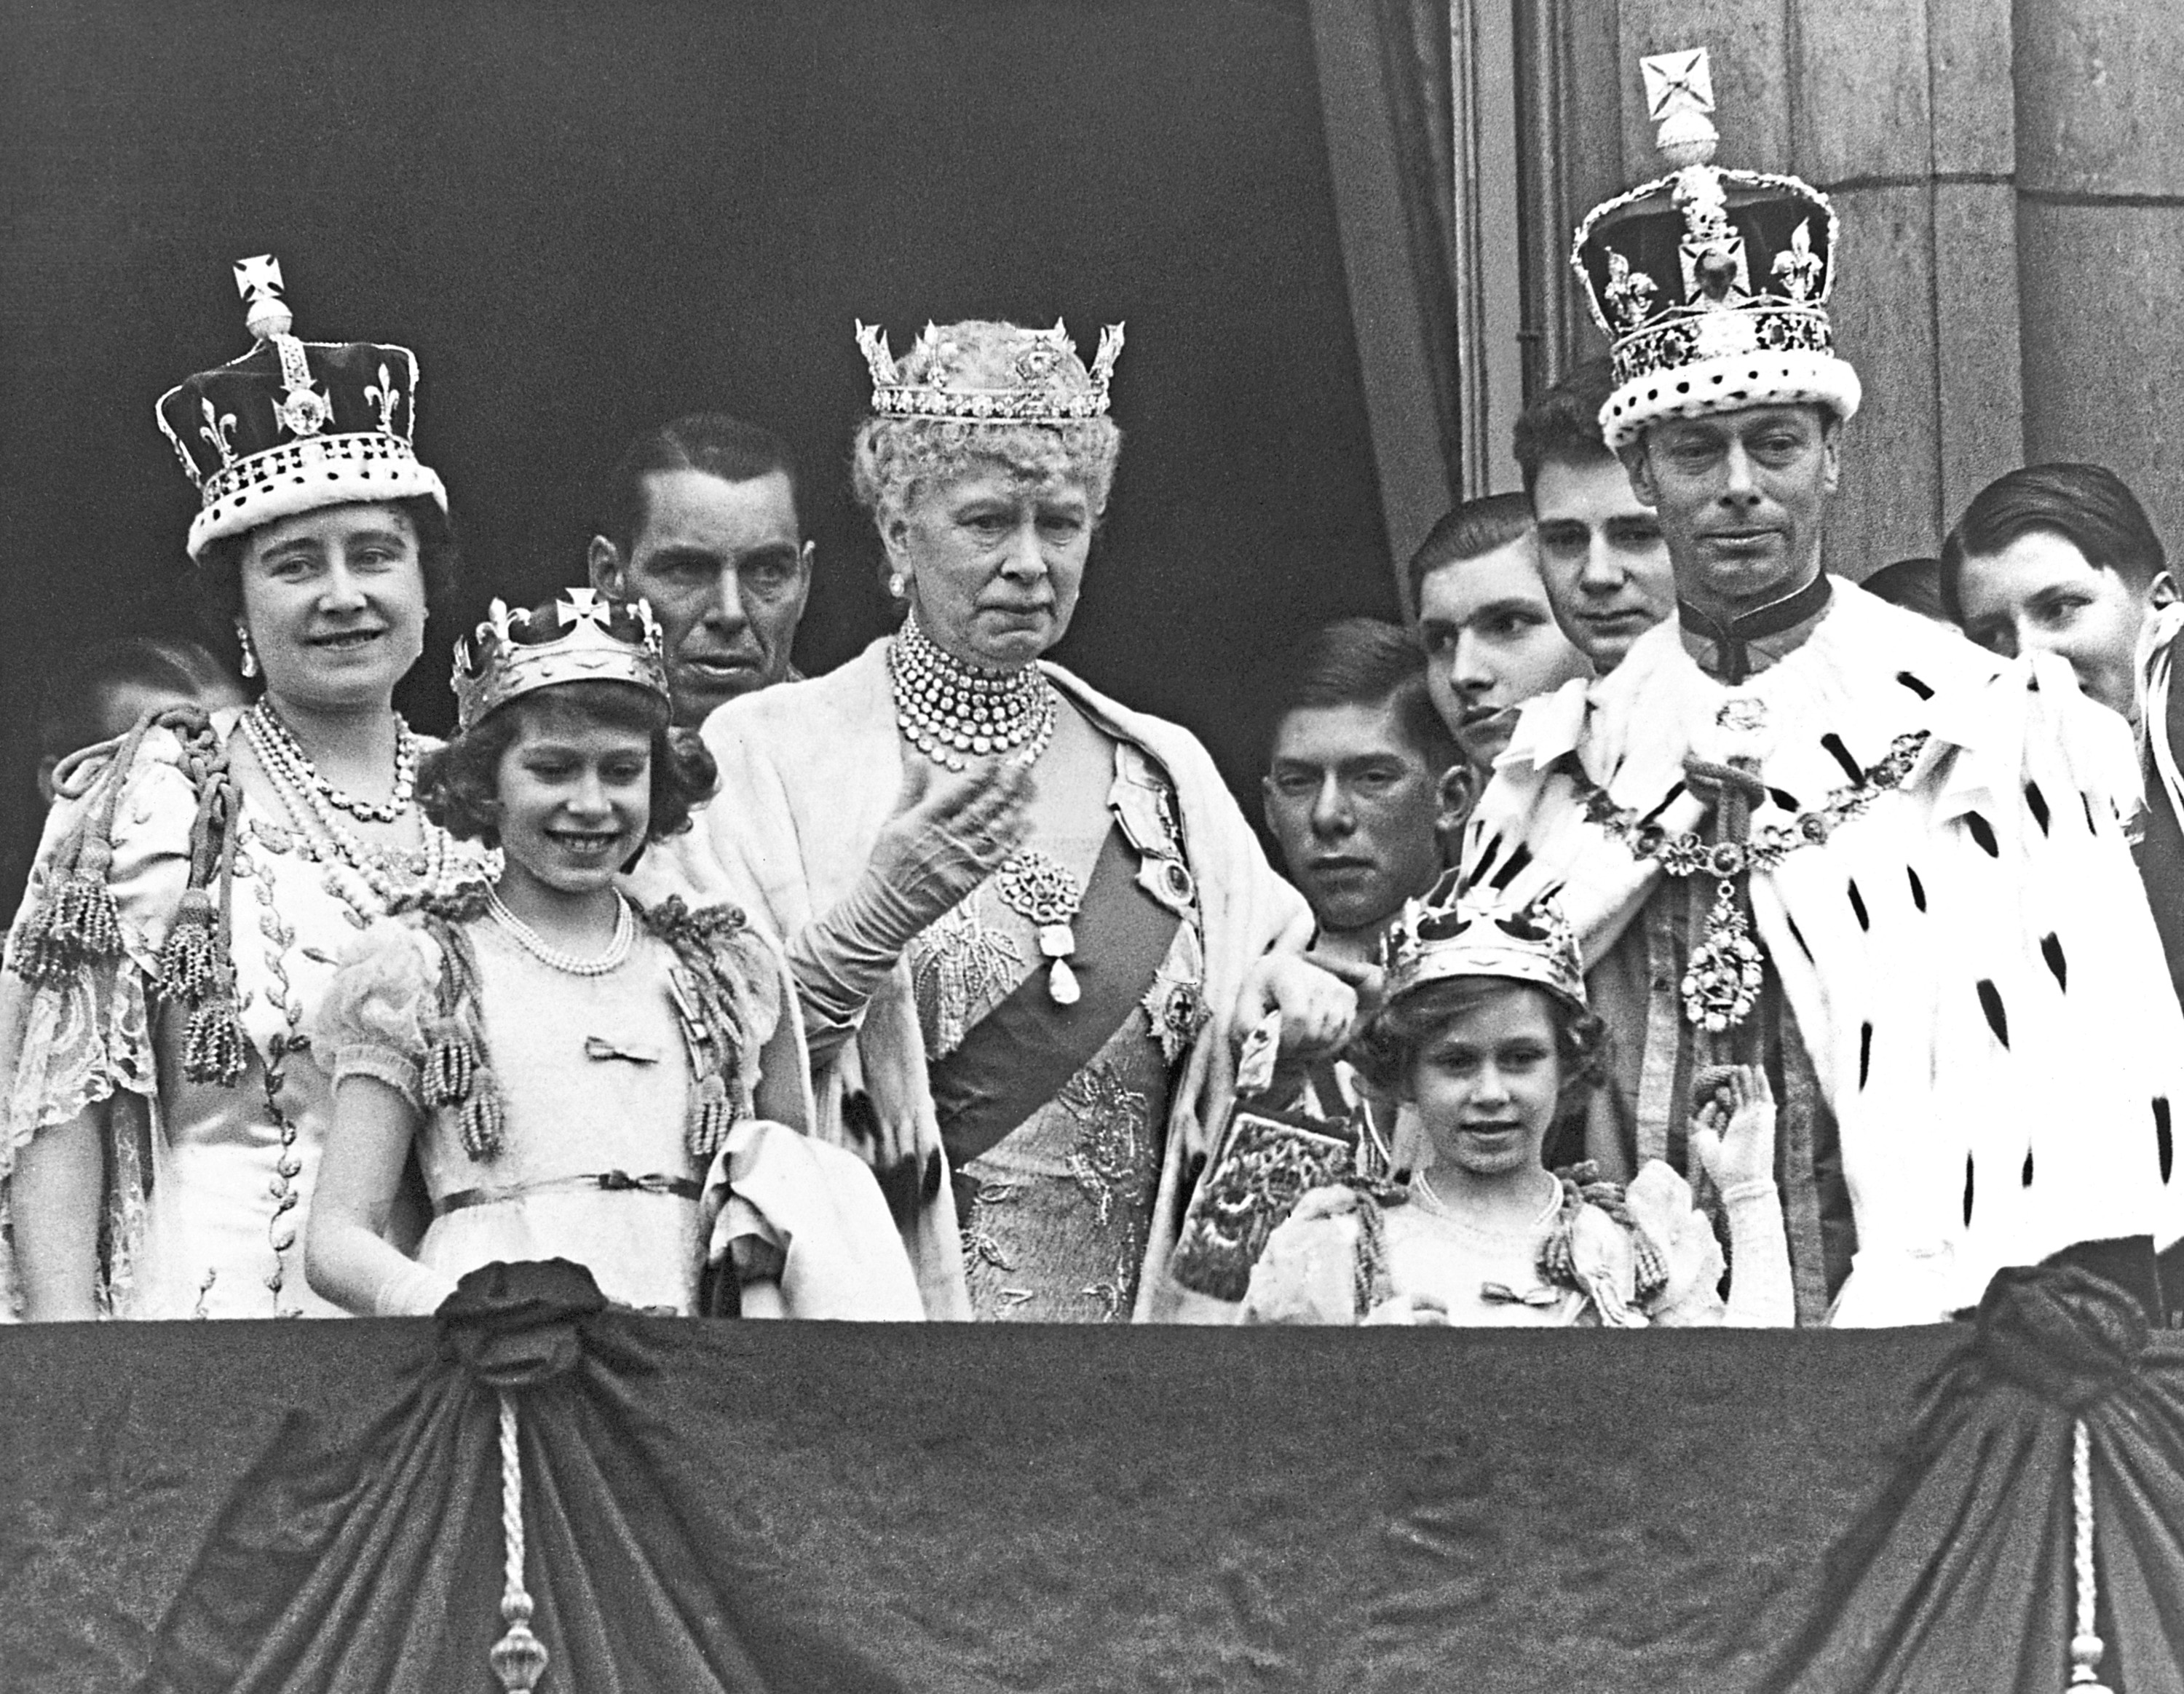 The Royal Family on the balcony at Buckingham Palace after the coronation of King George VI of England. Shown are (from left to right): Queen Elizabeth; Princess Elizabeth; Queen Mary the Queen Mother; Princess Margaret; and King George VI.